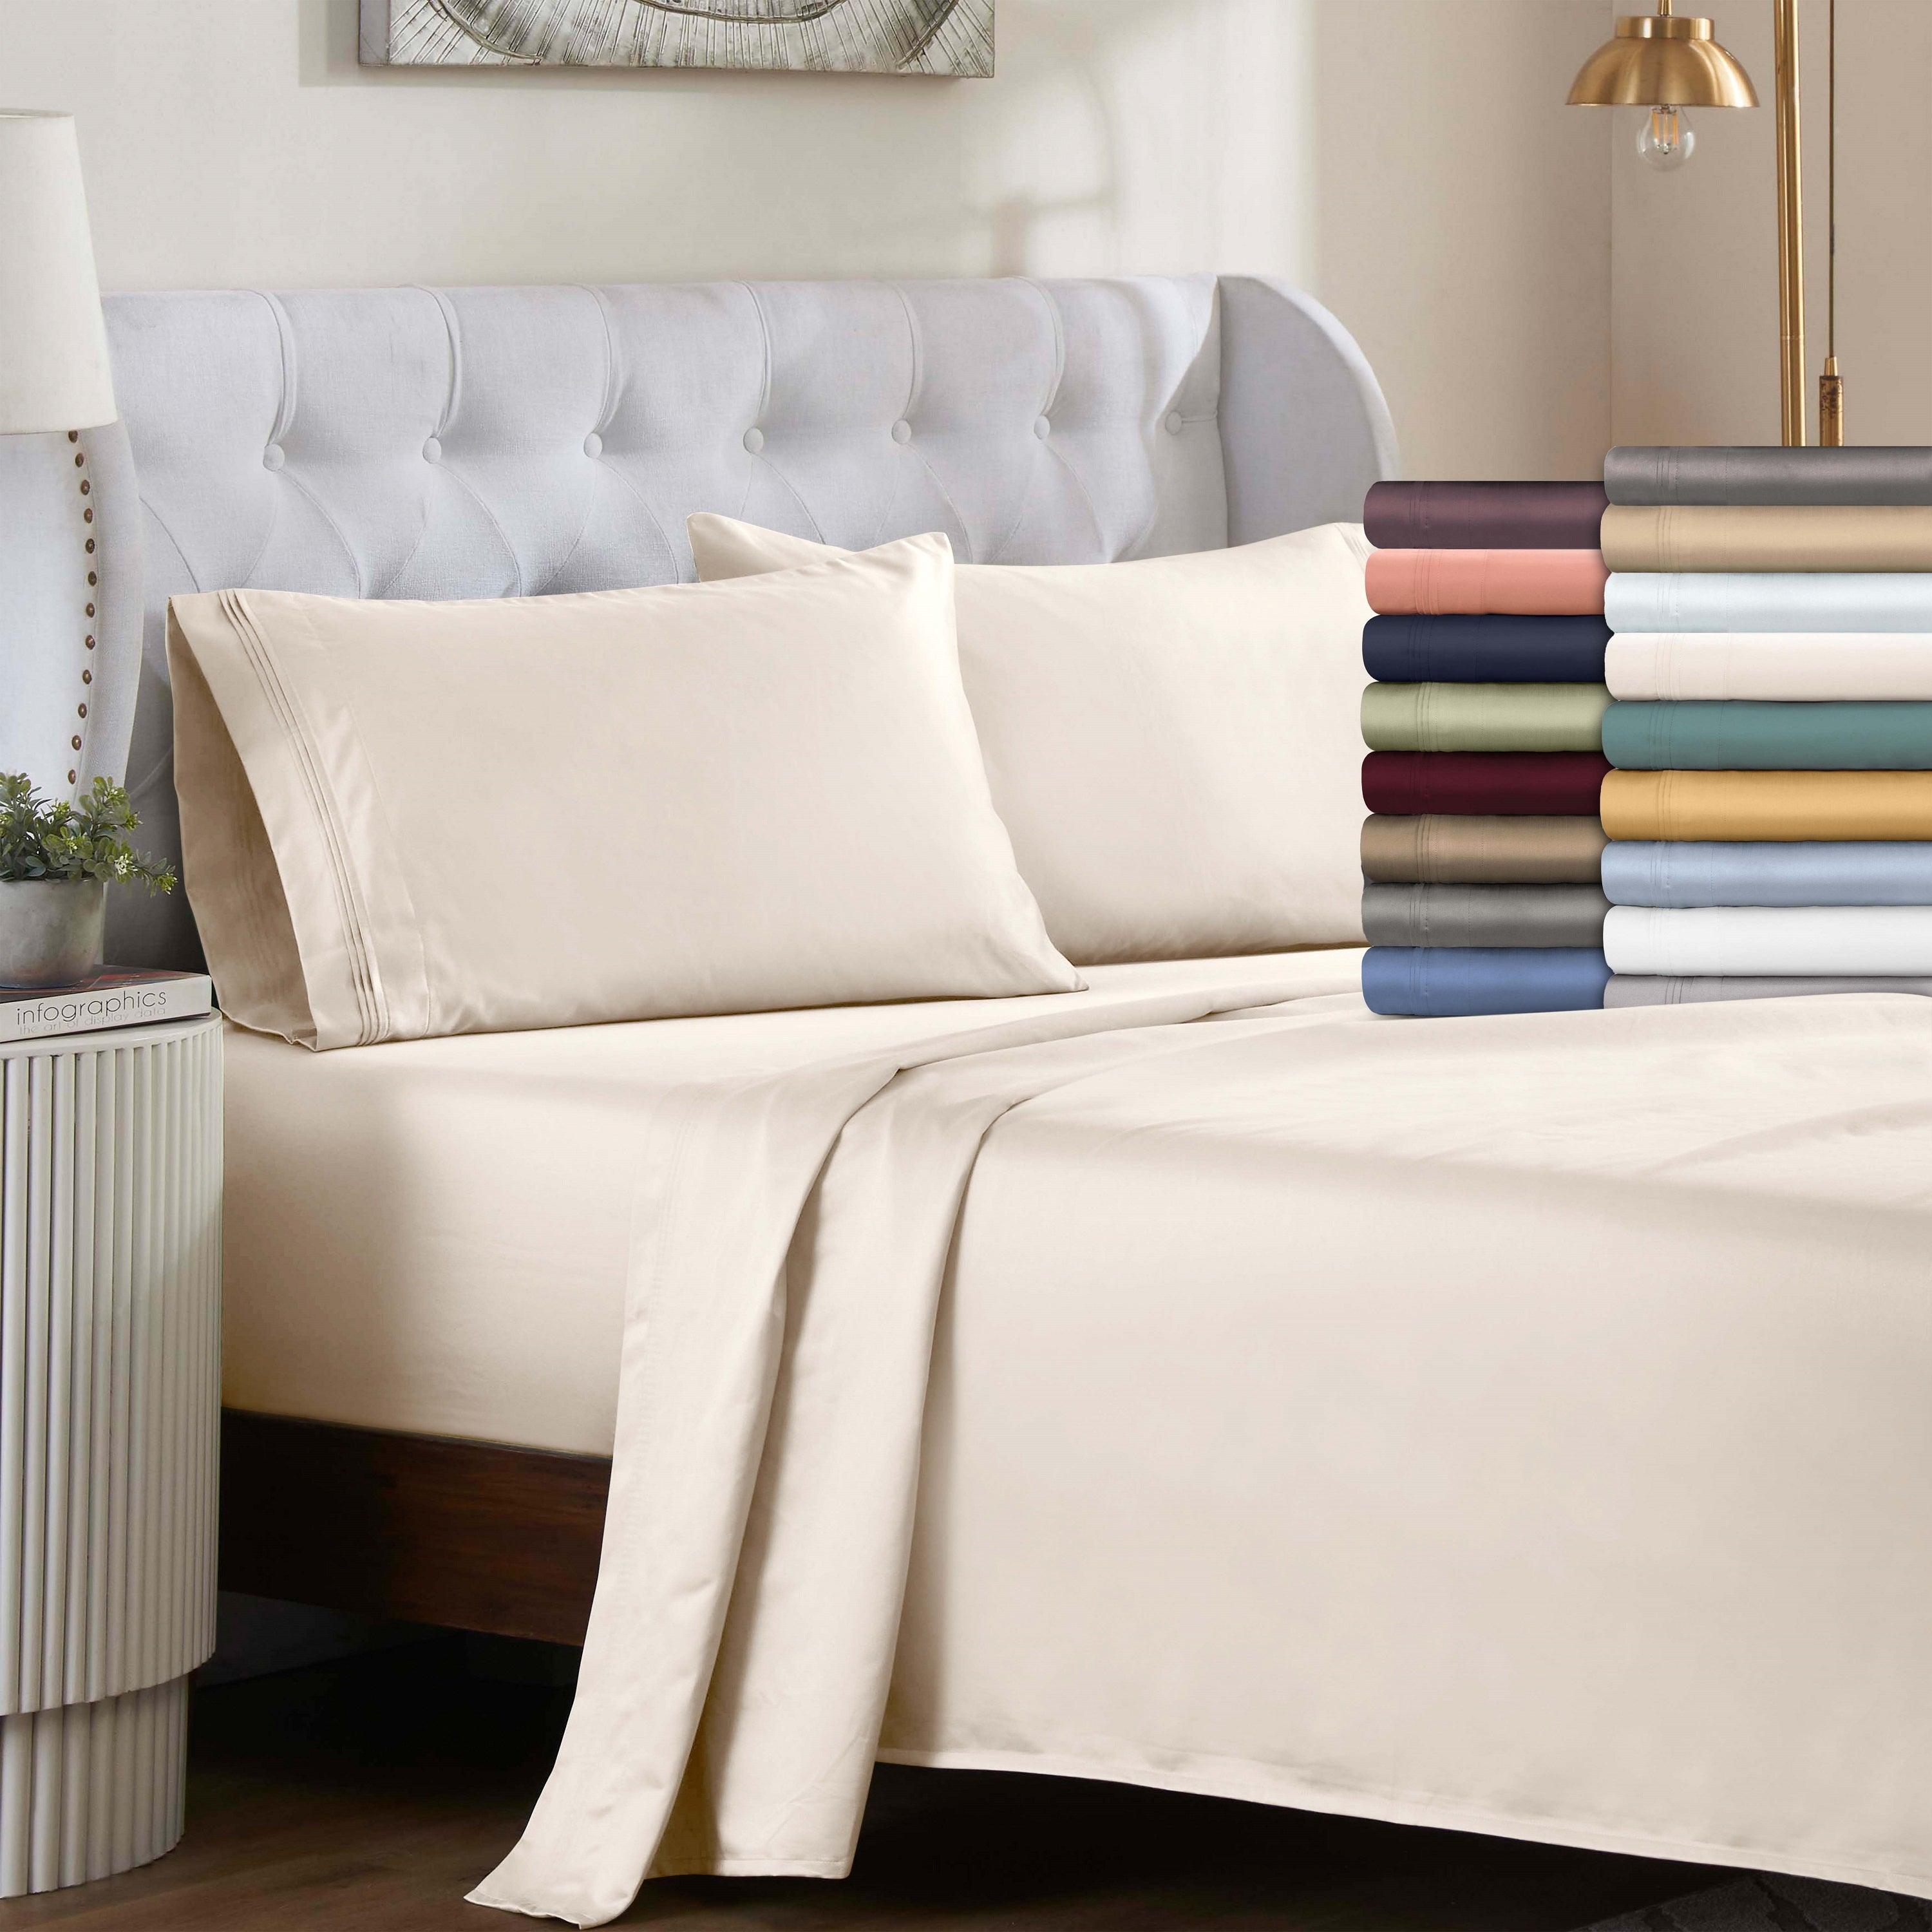 Superior Egyptian Cotton 1000 Thread Count Sheet Set Olympic Queen